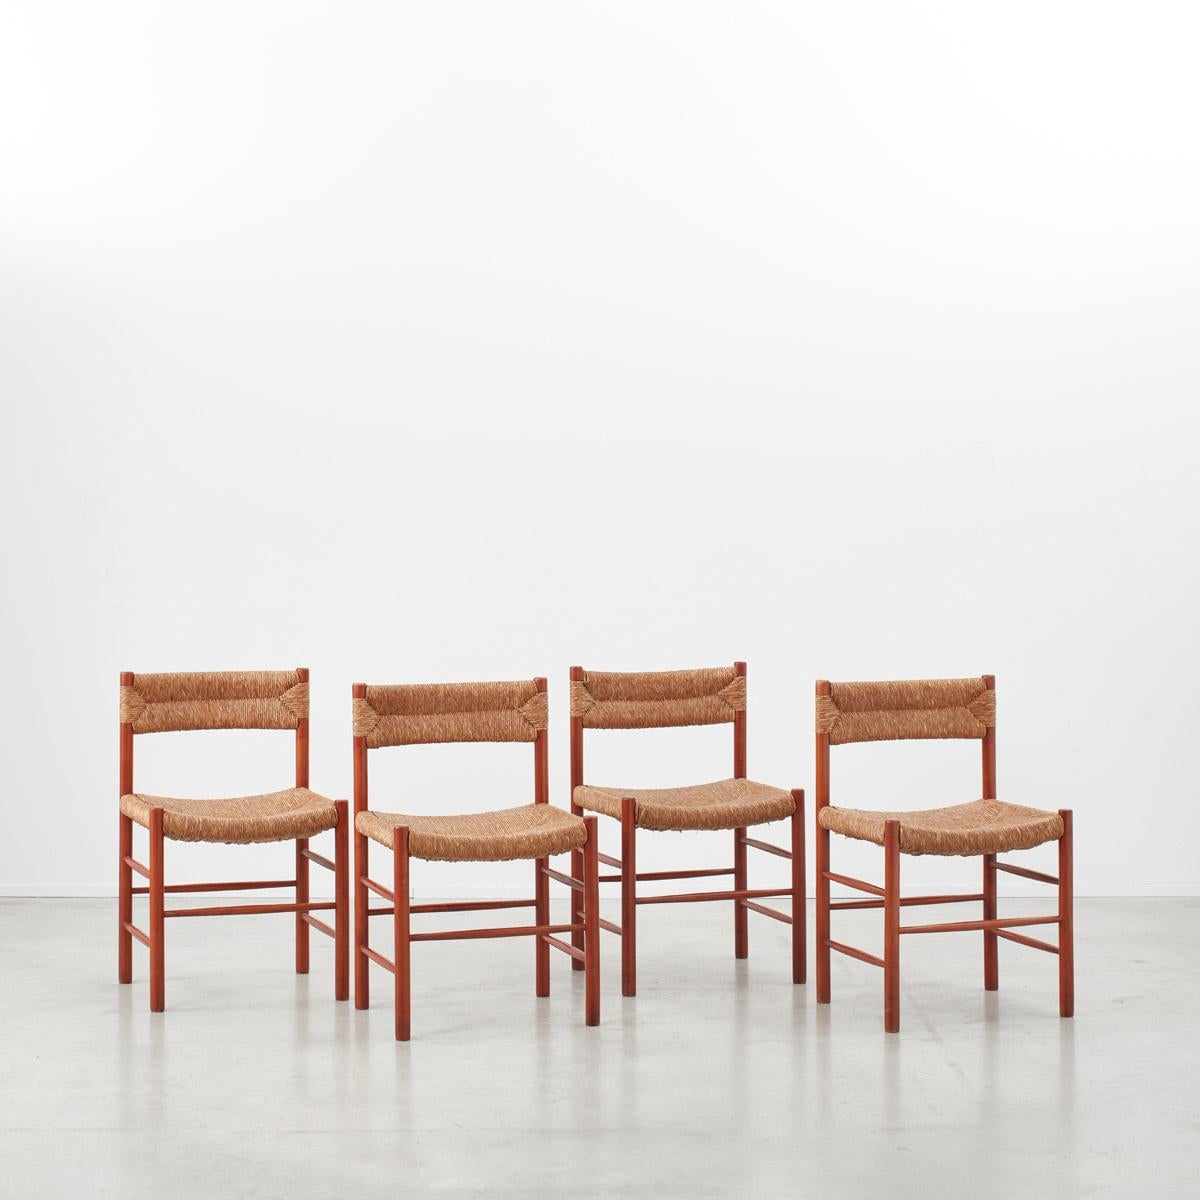 French Charlotte Perriand Dordogne Chairs for Robert Sentou, France, circa 1950